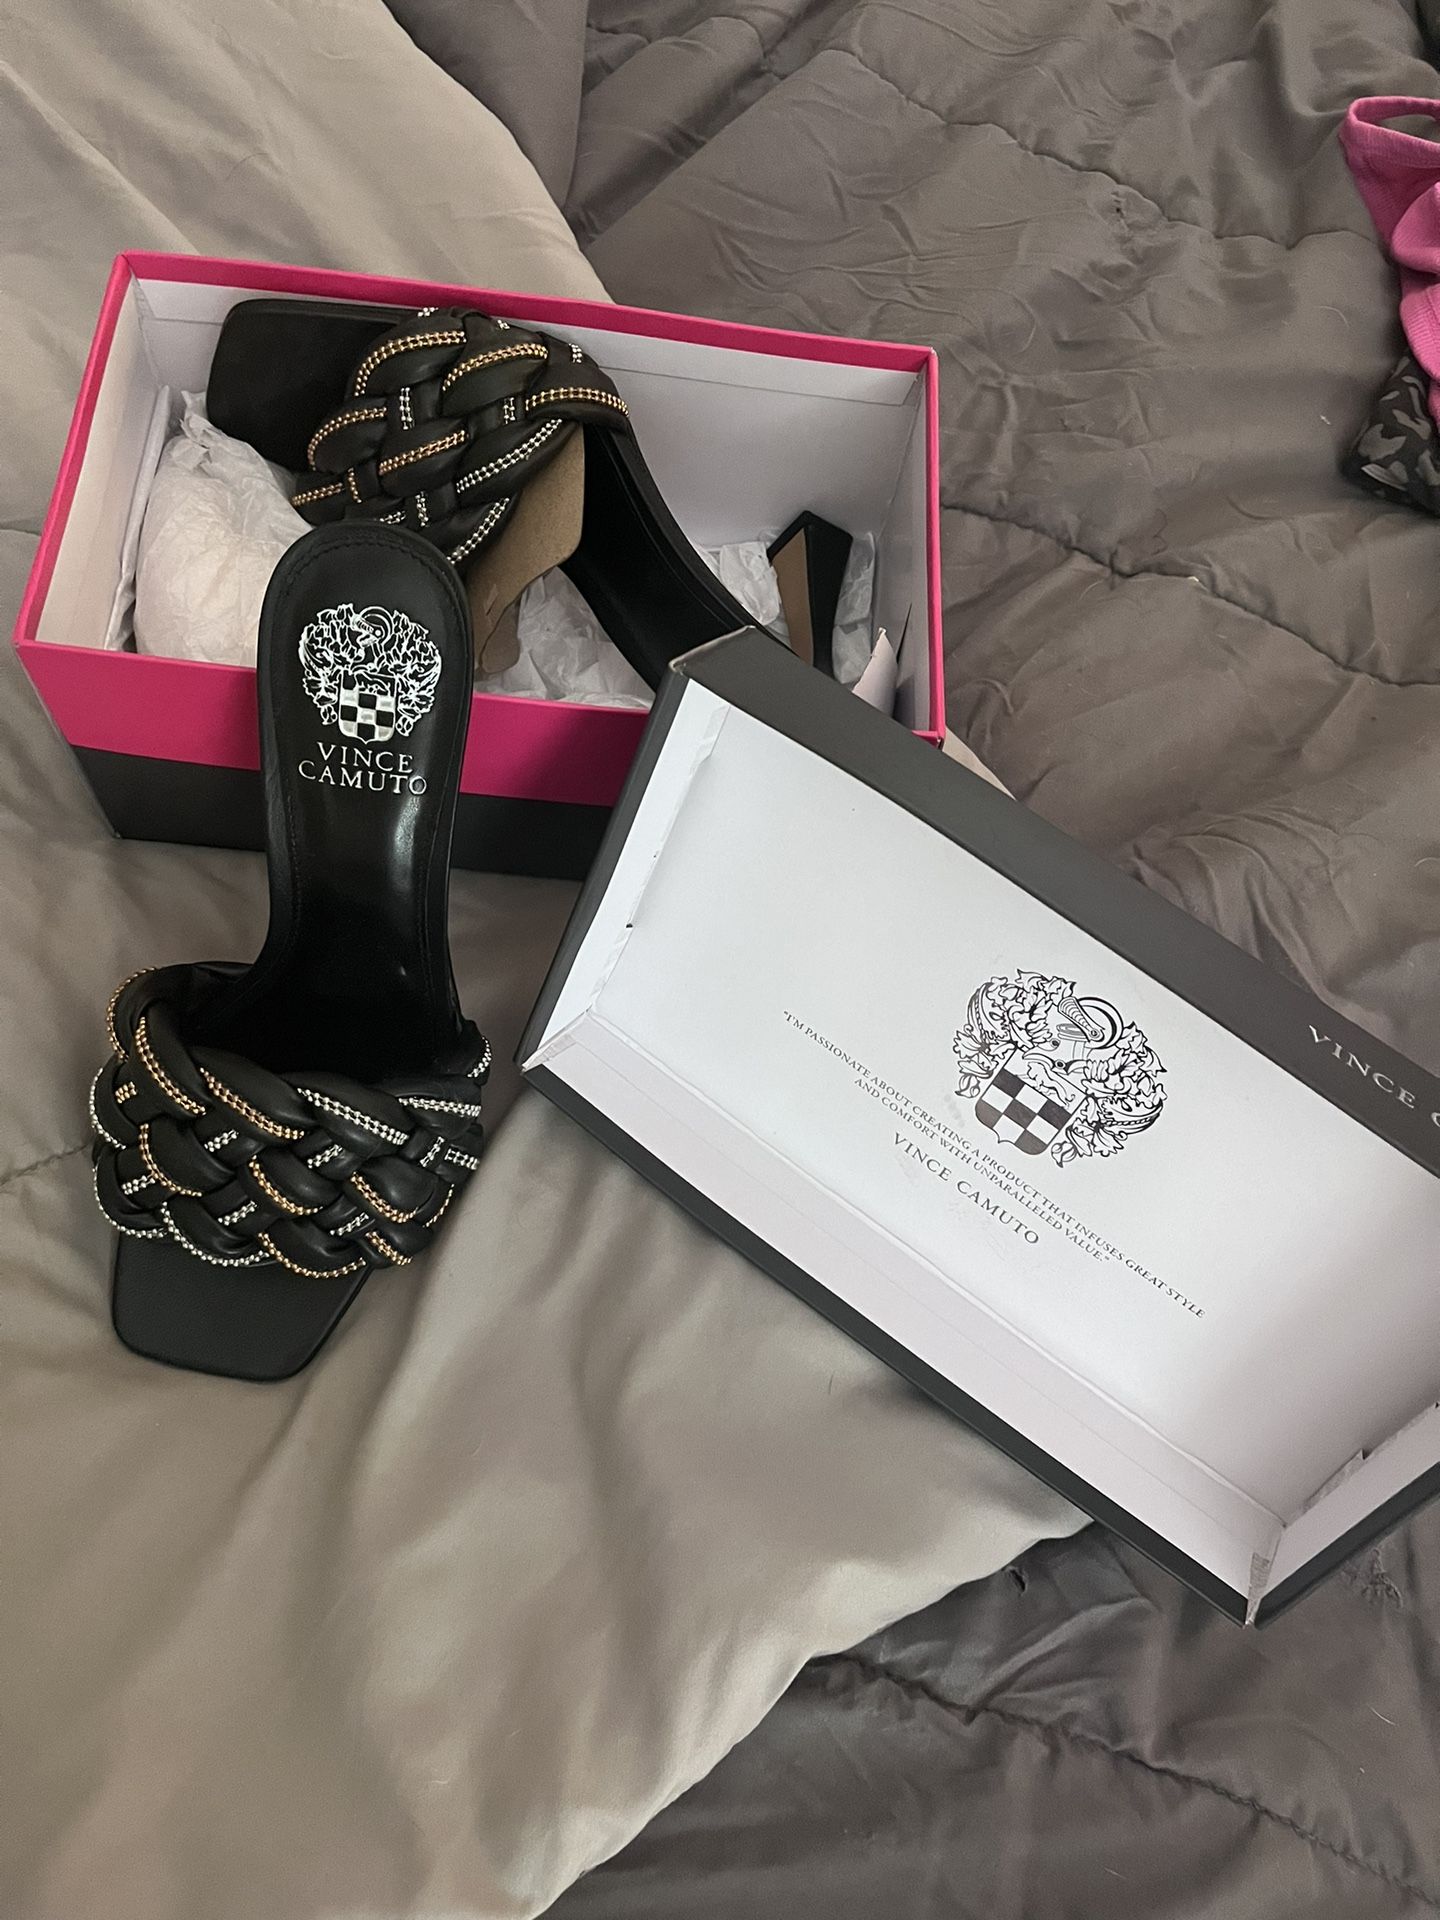 Vince Camuto Heels - Brand New